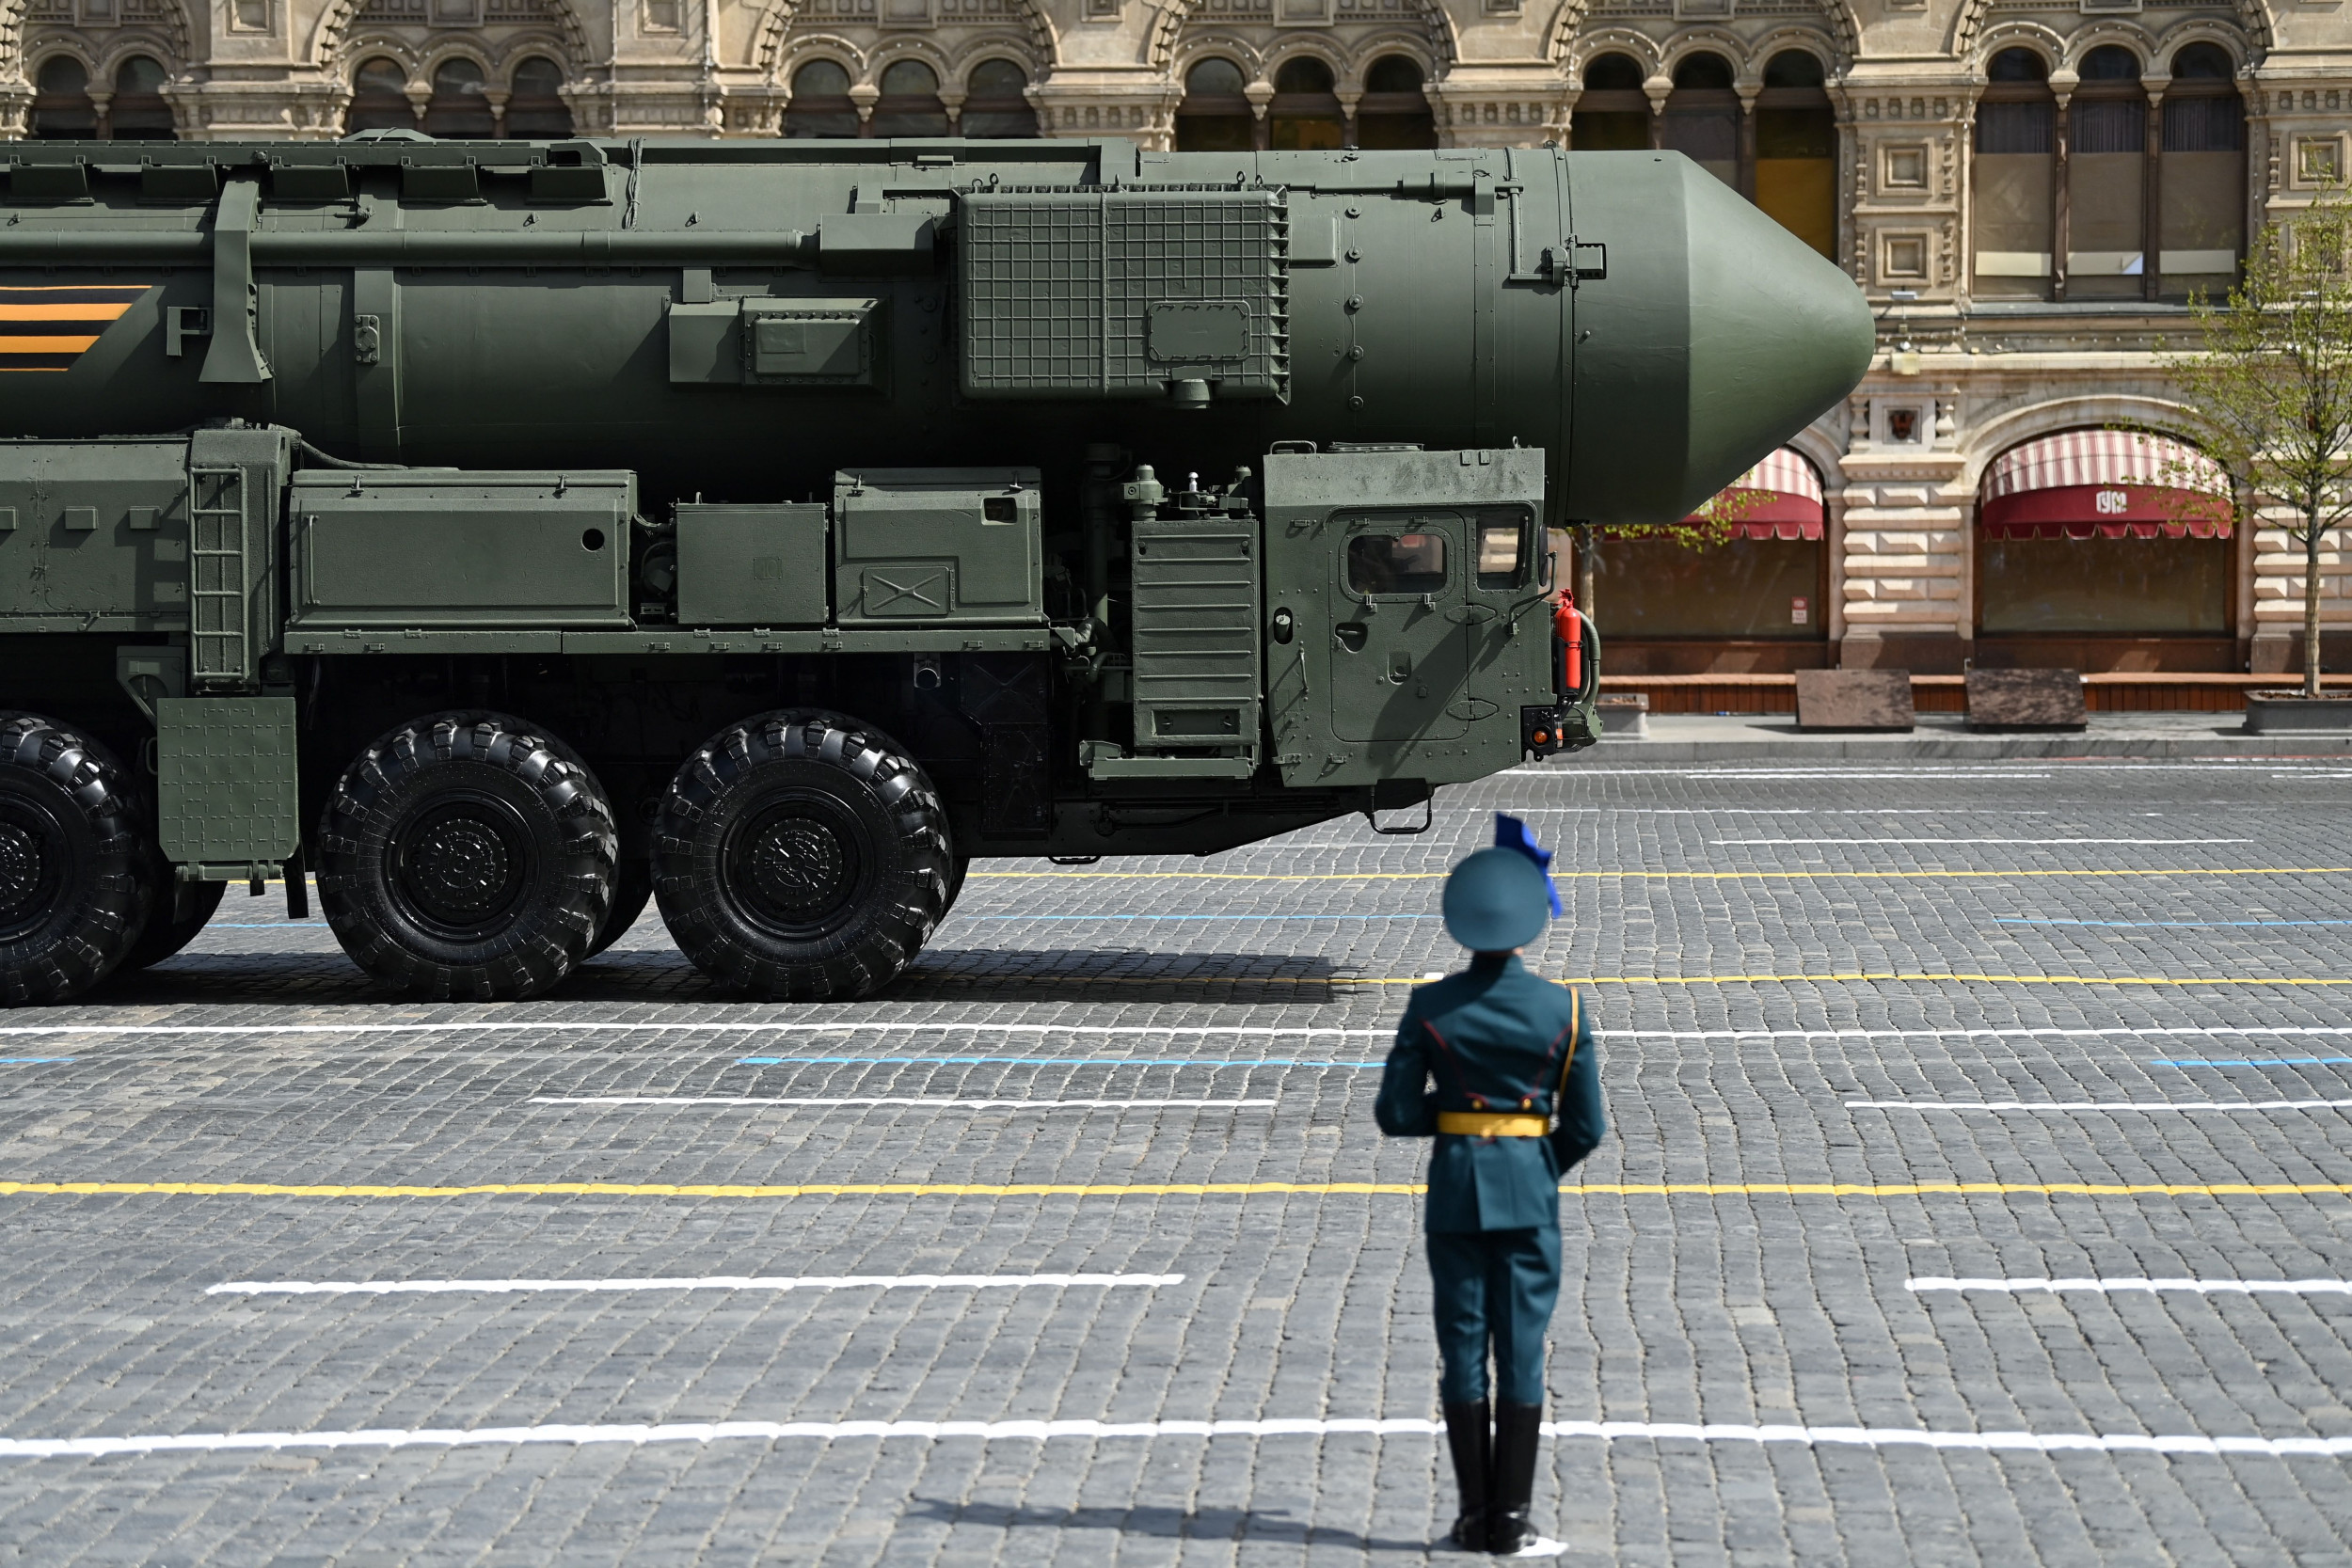 Russia Primes Nuclear Bomb 12 Times More Powerful Than Dropped on Hiroshima